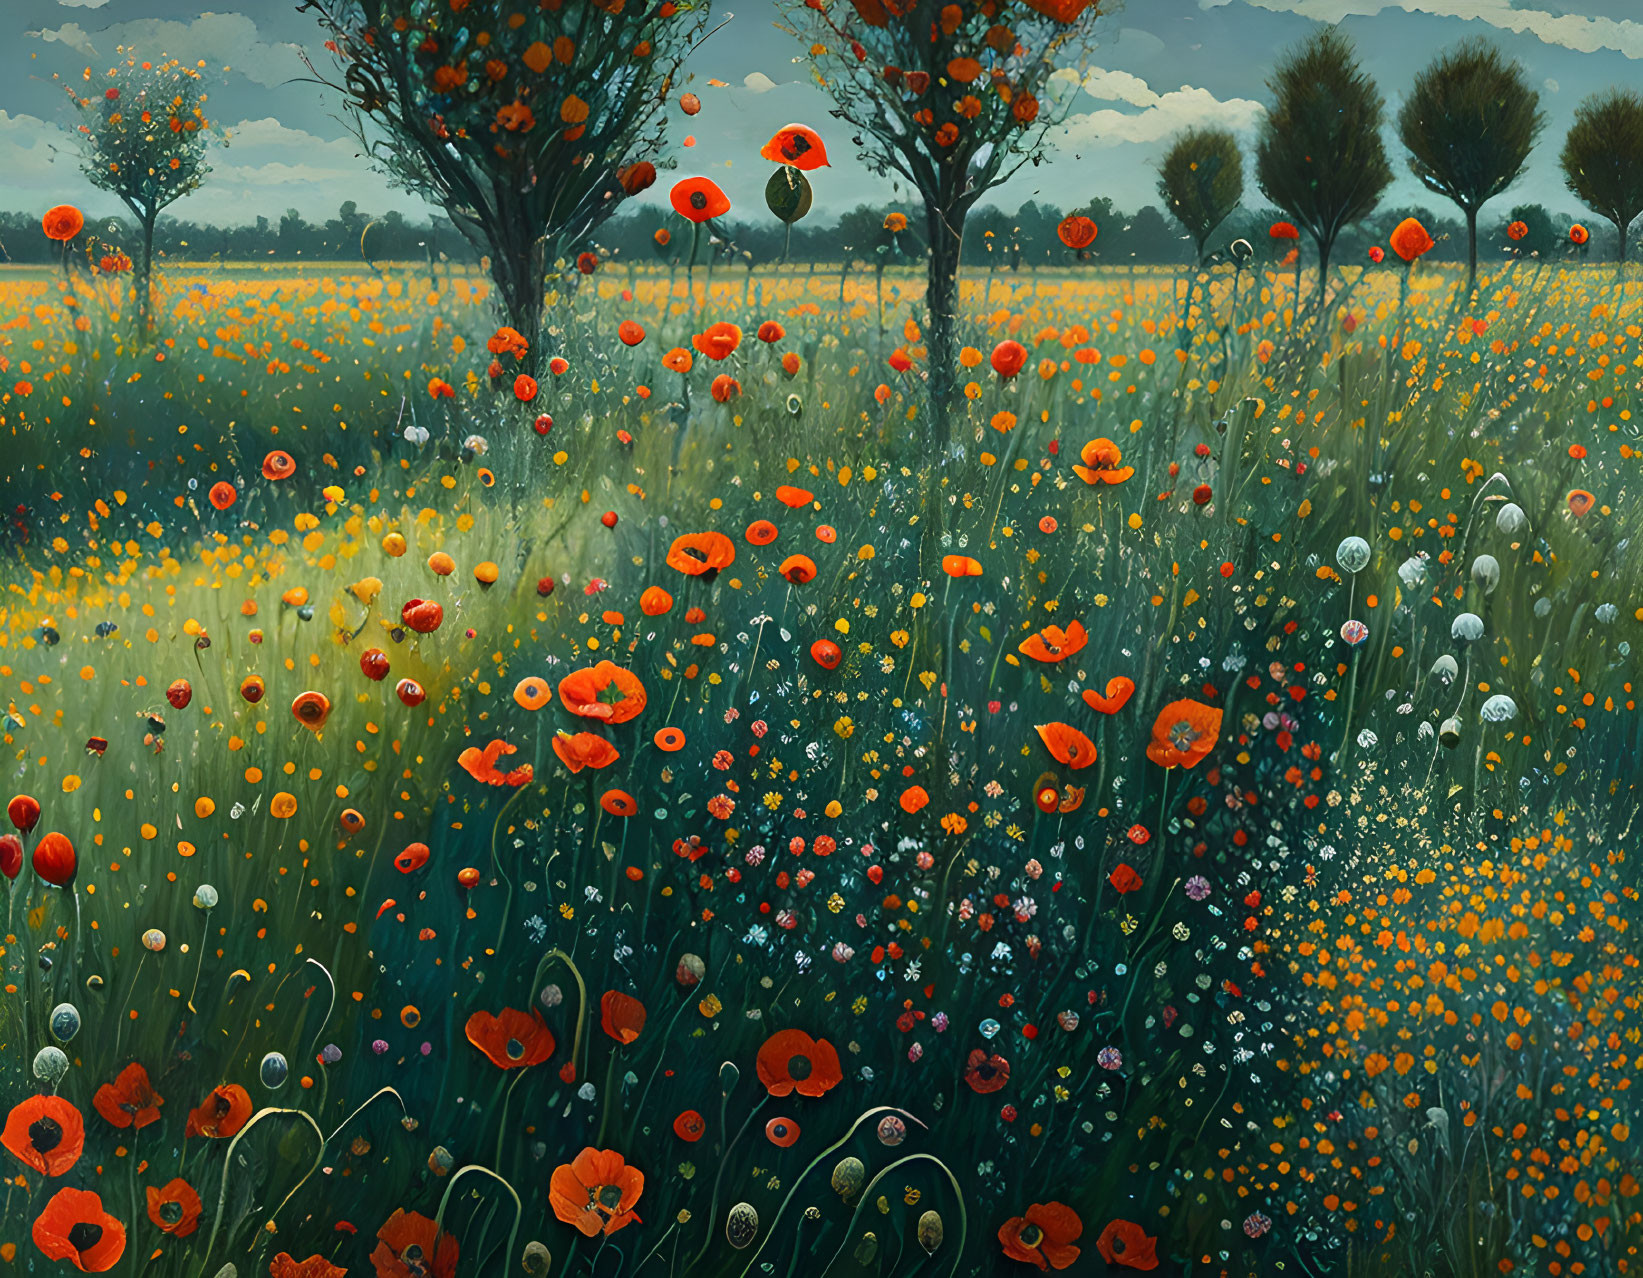 Field with Poppies